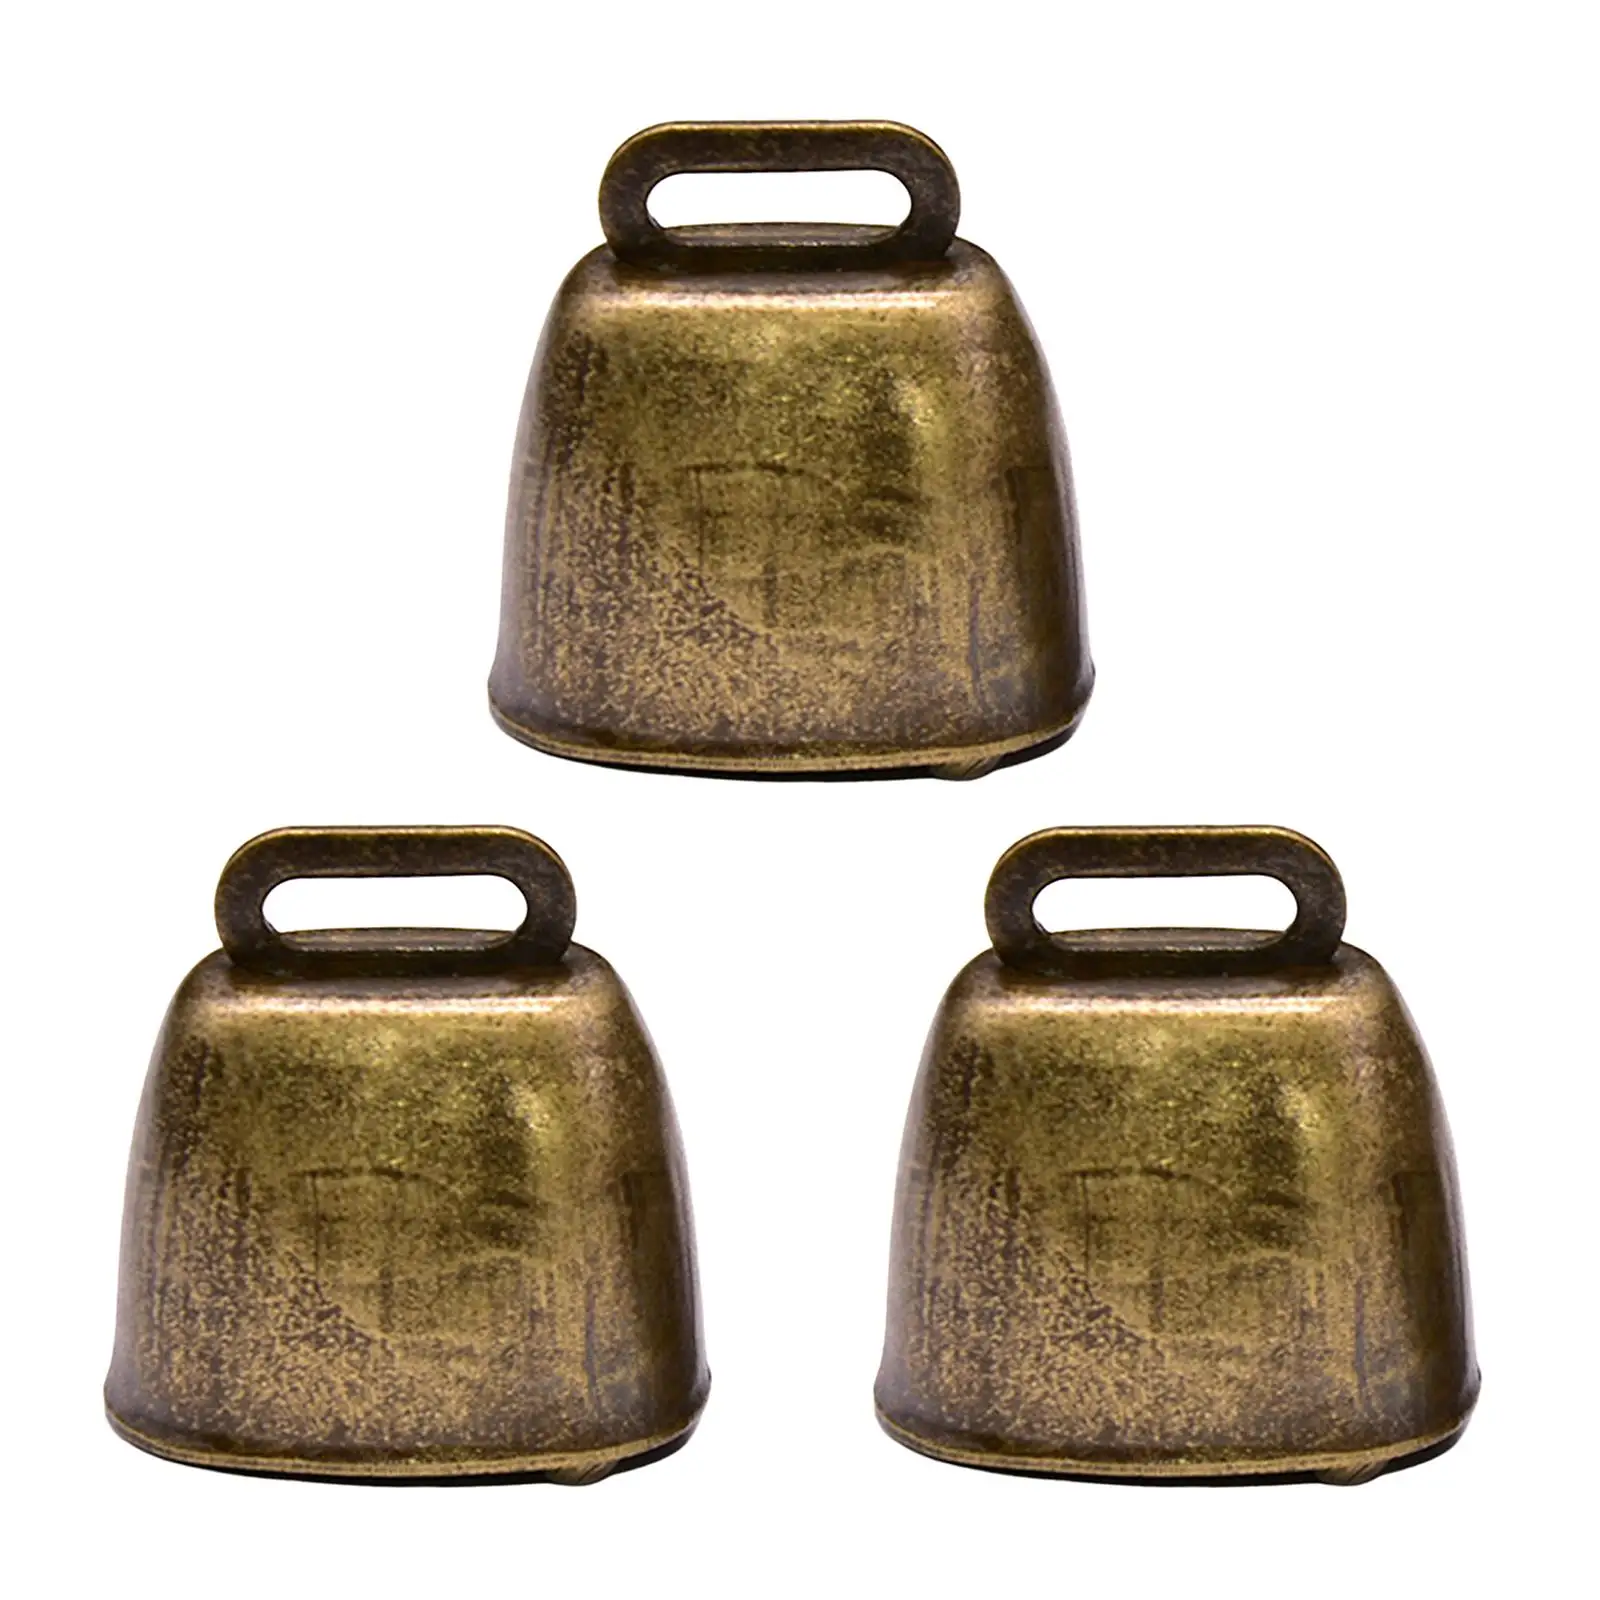 3 Pieces Retro Grazing Bell Premium Cowbell Small Wind Chime Pendant Metal Cow Bell Horse Cow Accessories